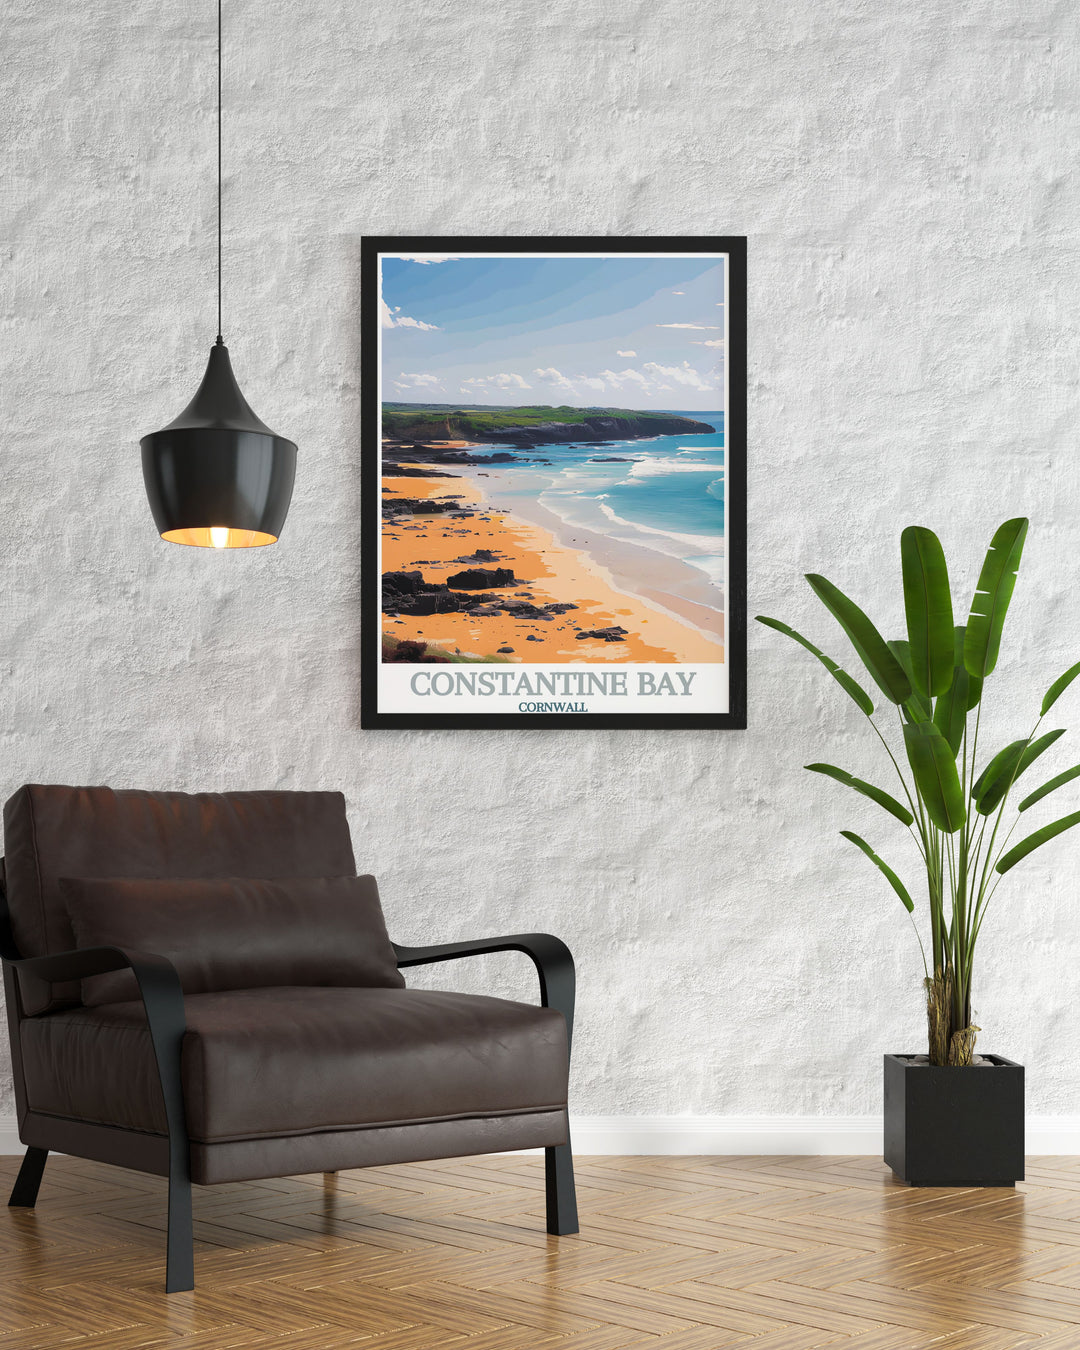 Capture the wild beauty of Constantine Bay and Boobys Bay in Cornwall, England, with our travel posters. Highlighting the pristine beaches, dramatic cliffs, and serene bays, these prints are perfect for bringing a touch of Cornwall into your home.